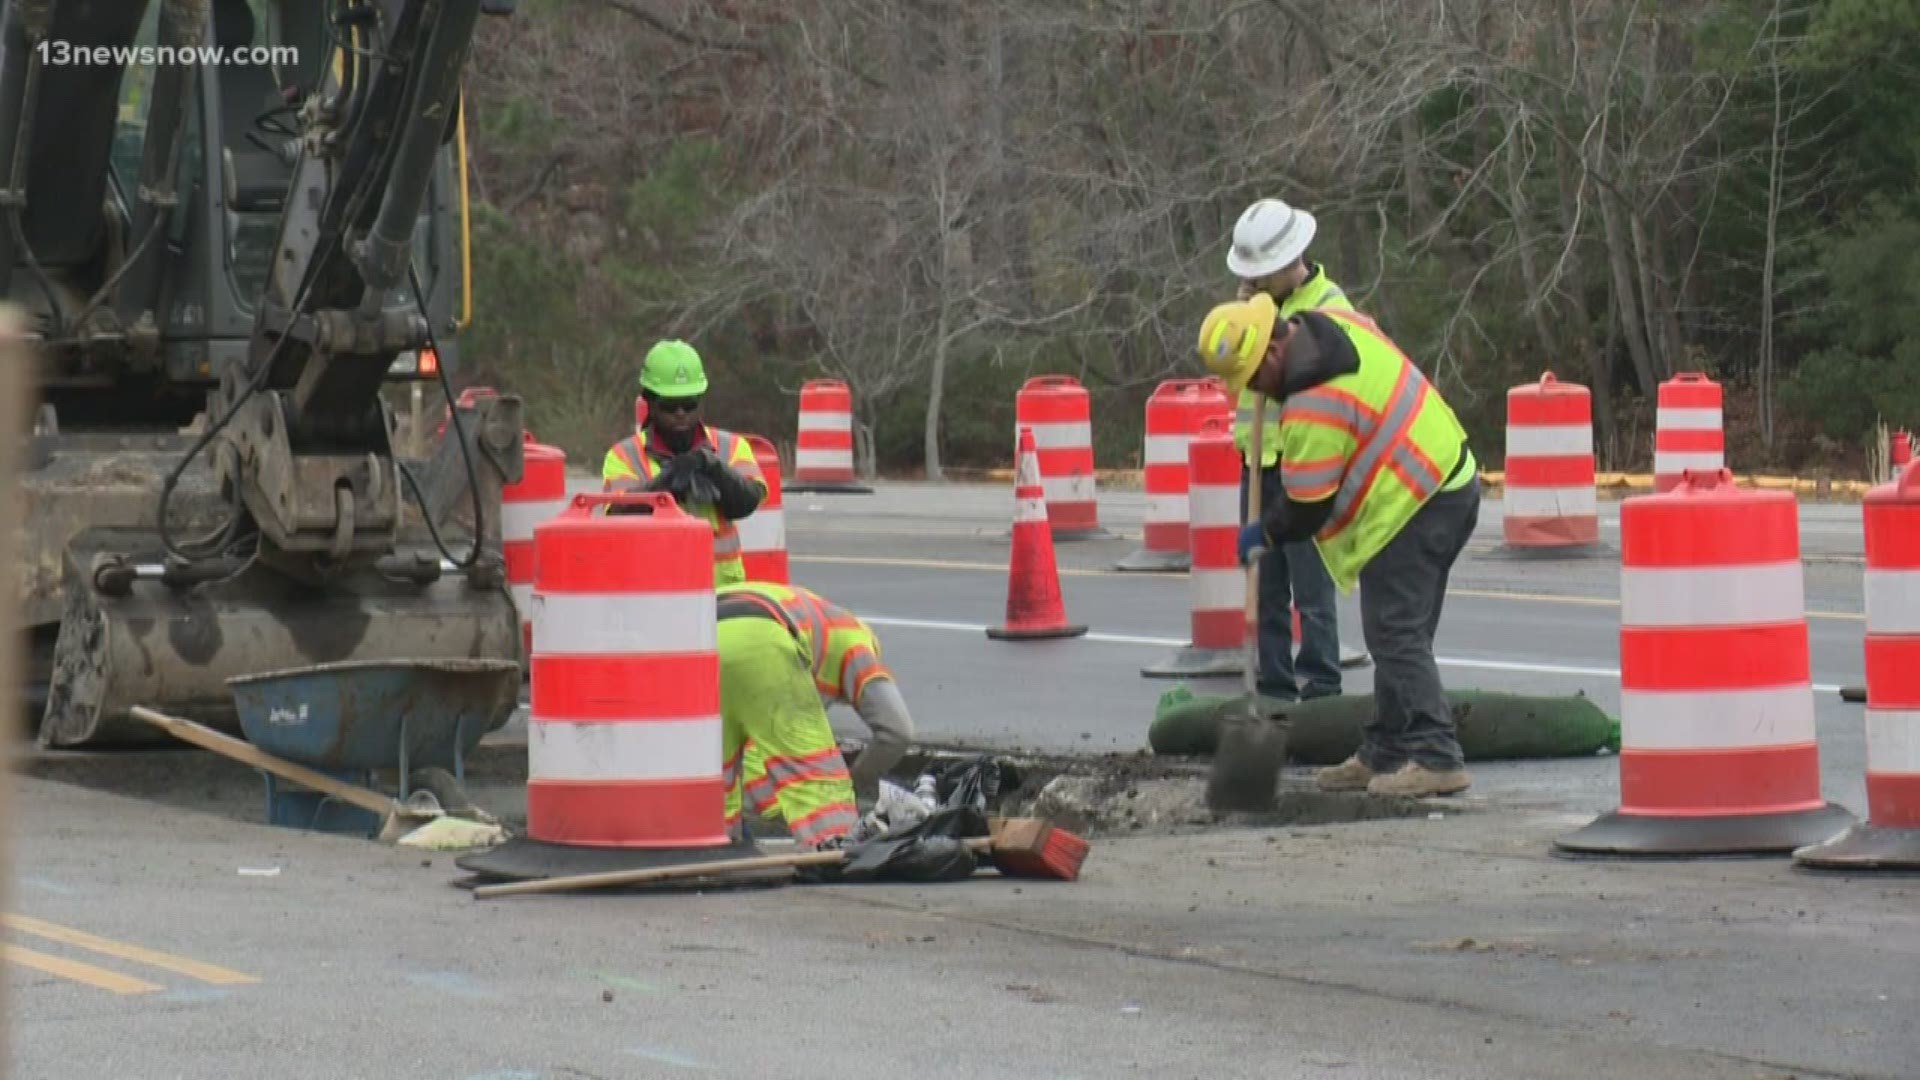 VDOT is getting rid of the feeder lanes on Laskin road and the work is expected to last until 2023. Businesses said it's hurting their business.